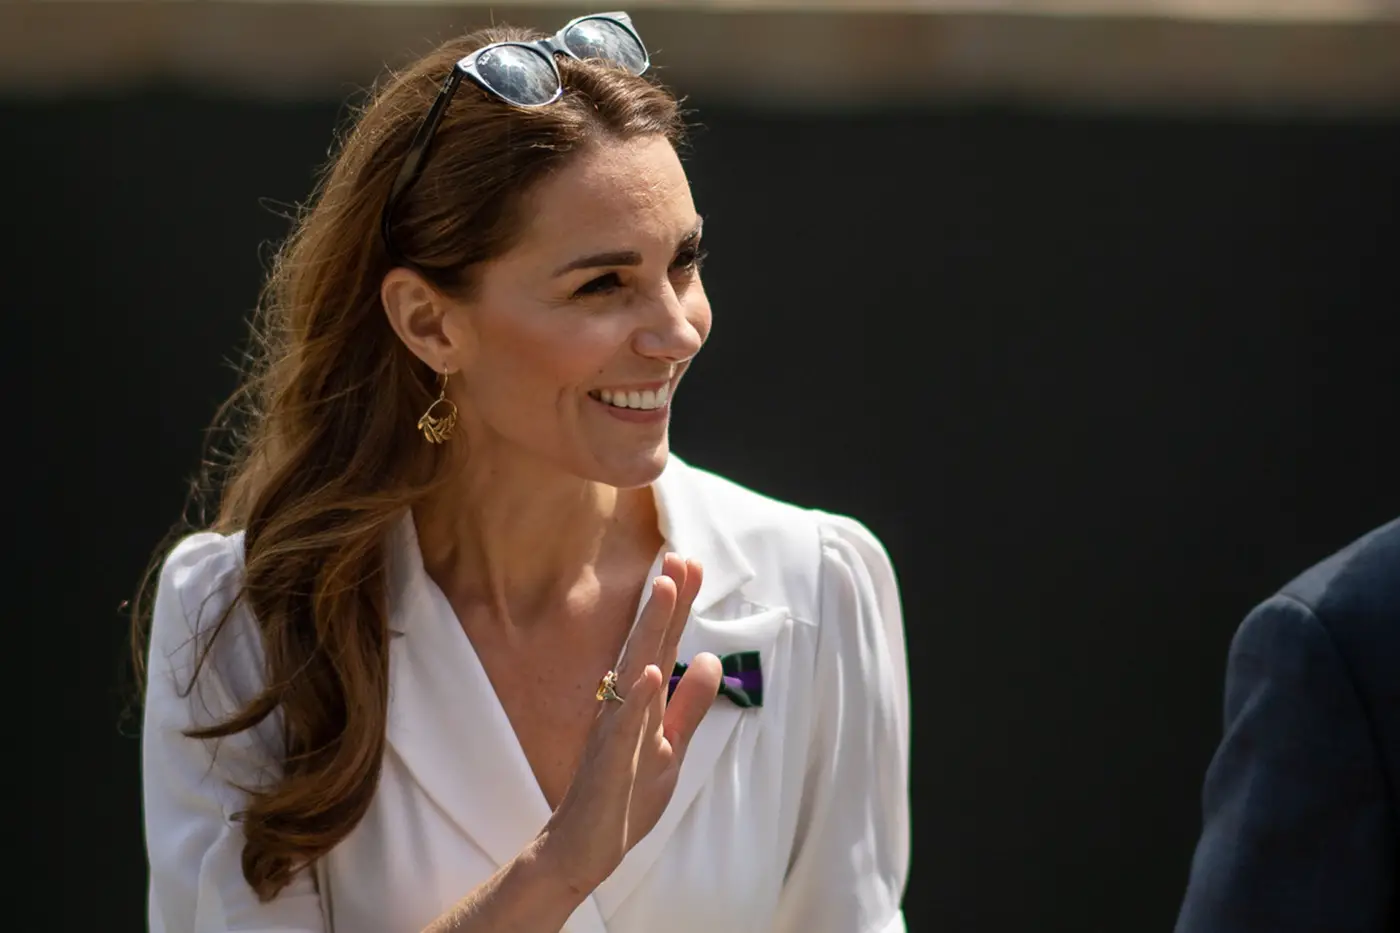 Meet Kate Middleton, AKA the current Princess of Wales and the Future Queen of the UK, a shining star in the British royal family